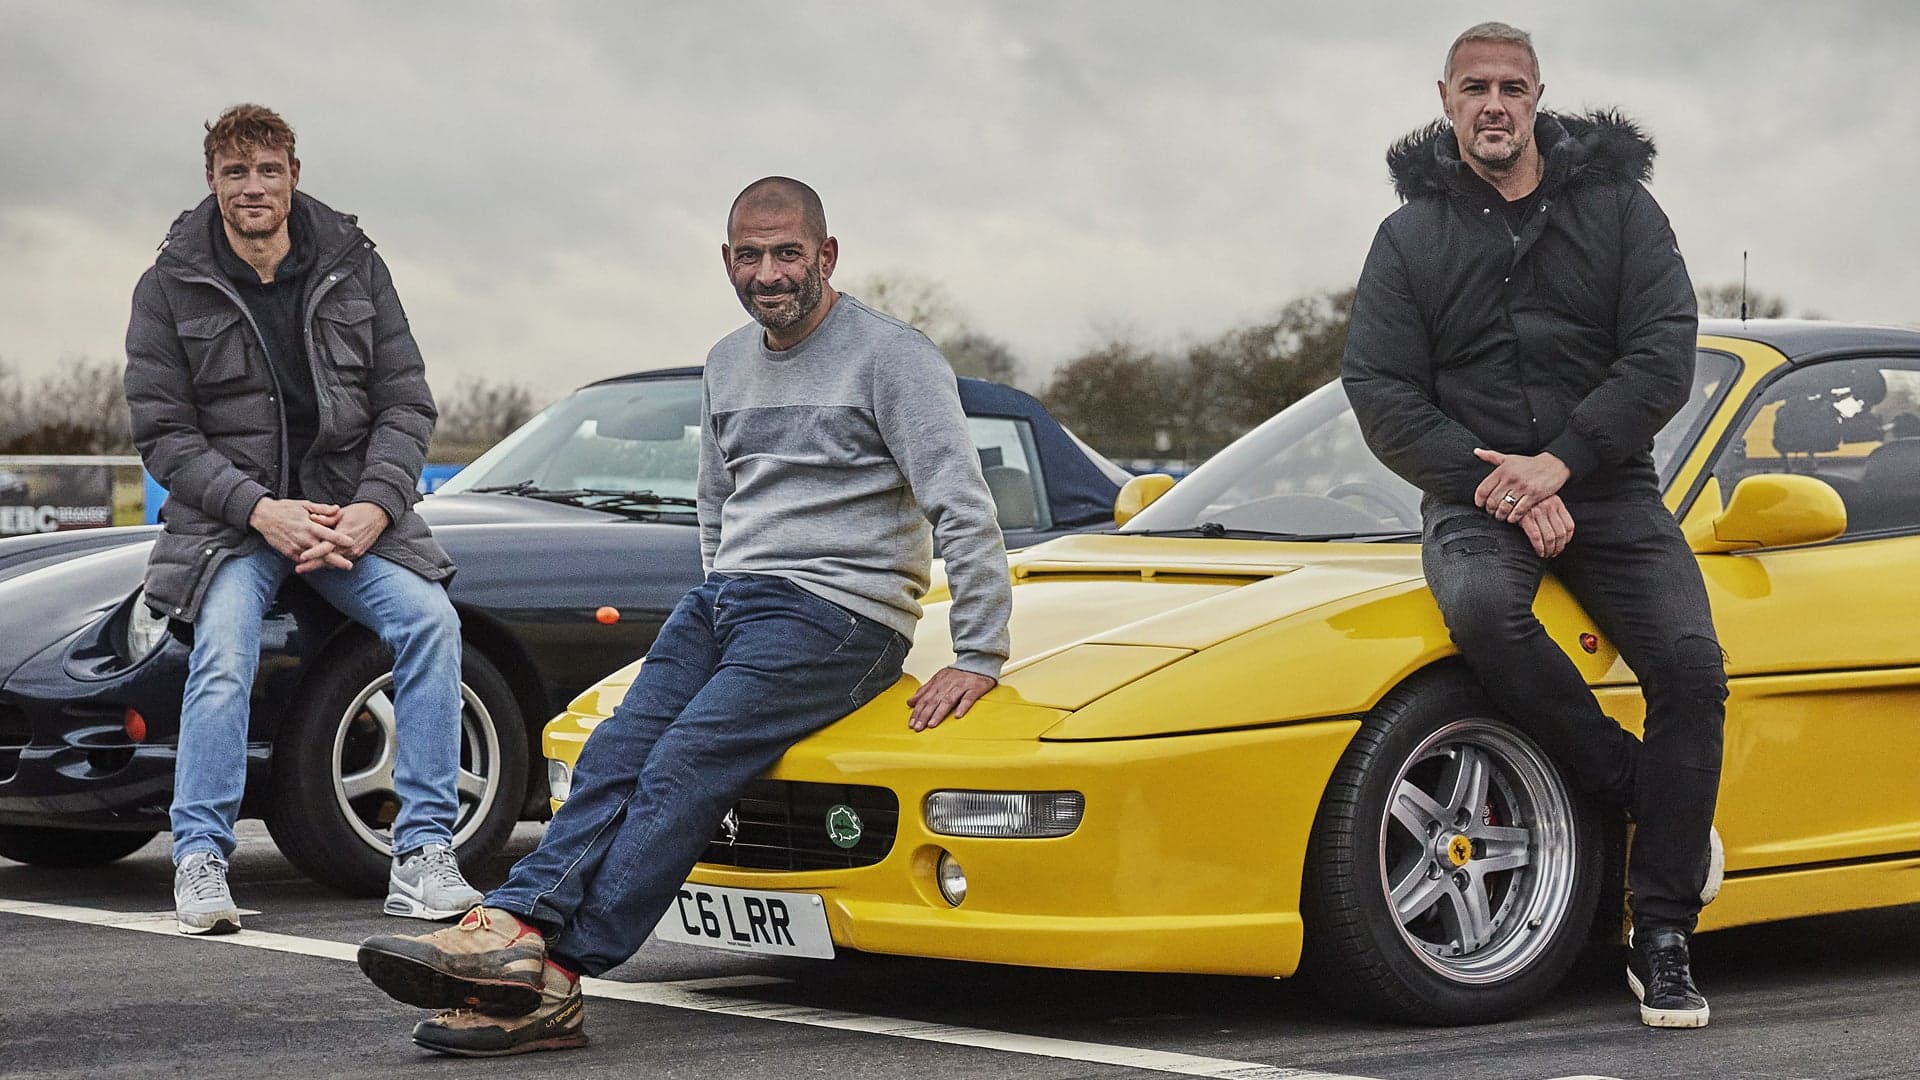 Top Gear Season 30: How the World’s Most Famous Motoring Show Out-Drove a Pandemic